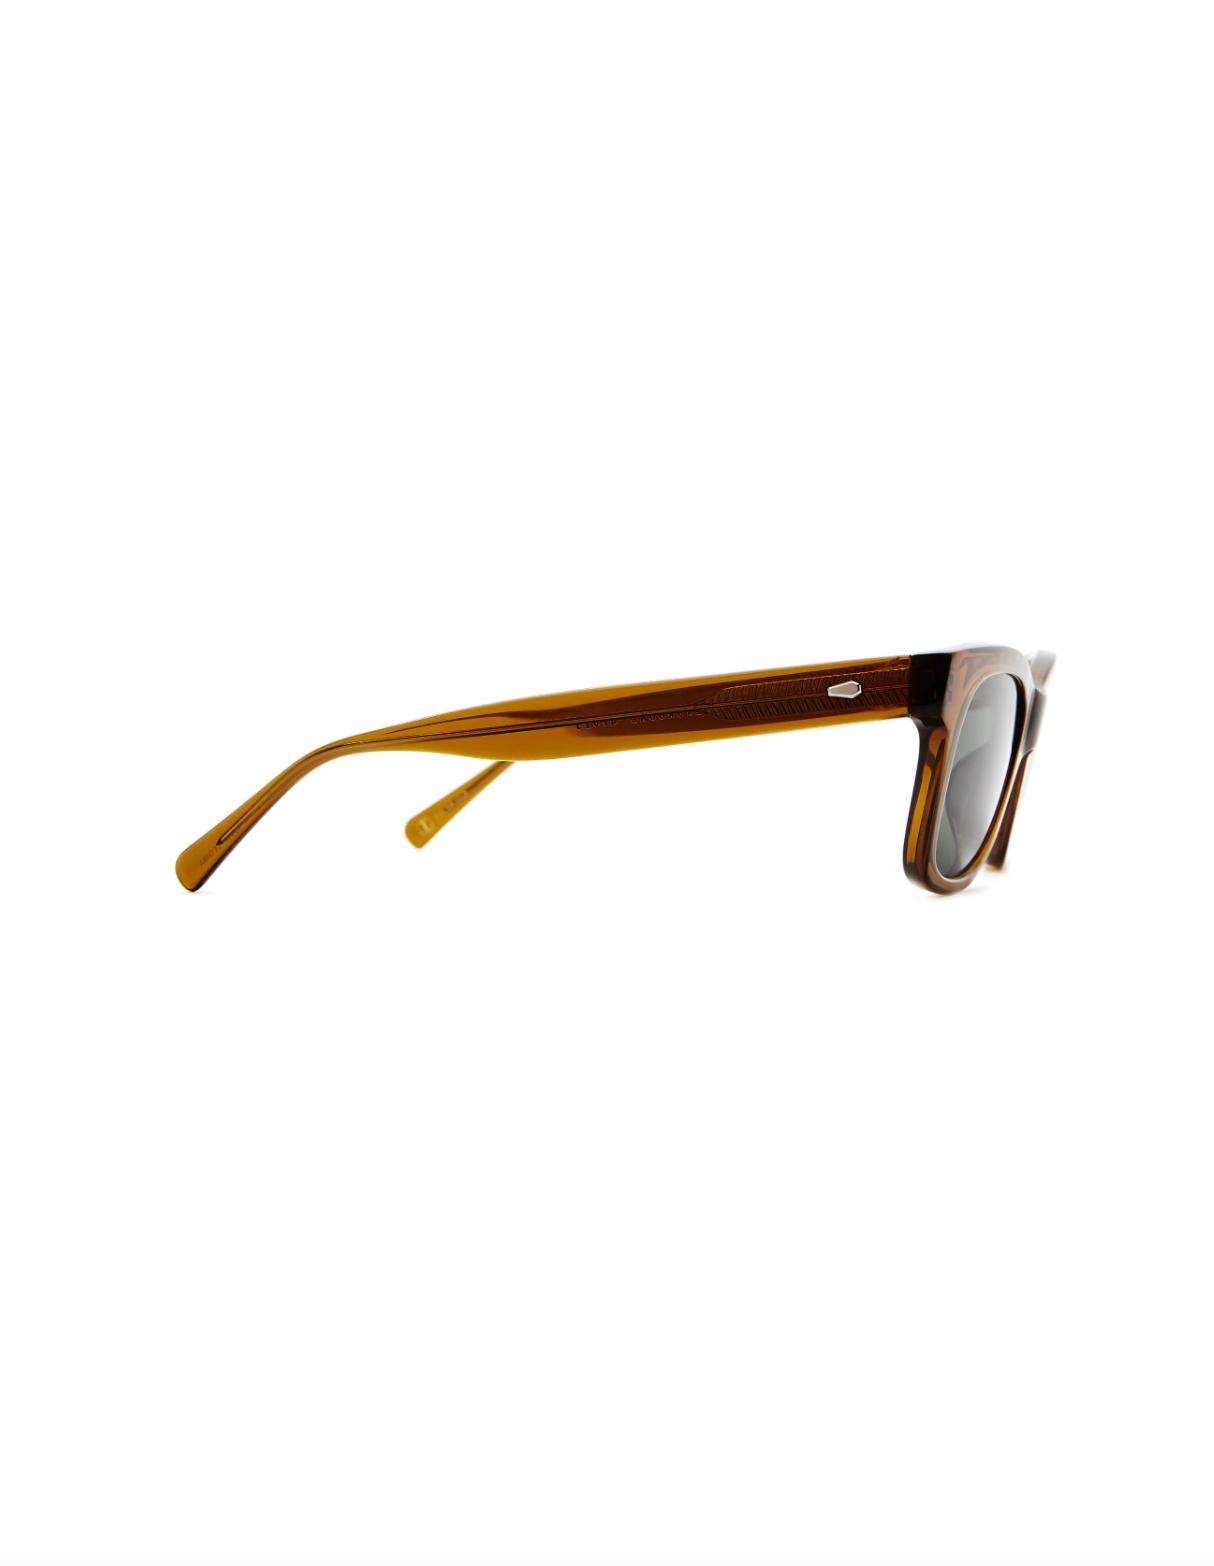 The Suntan Underground is a classic sized frame that favors medium and large sized heads. Features a retro tilt that's common in vintage styles. Handcrafted bioacetate frames—biodegradable, plant-based, earth-friendlier. Rx-ready.'